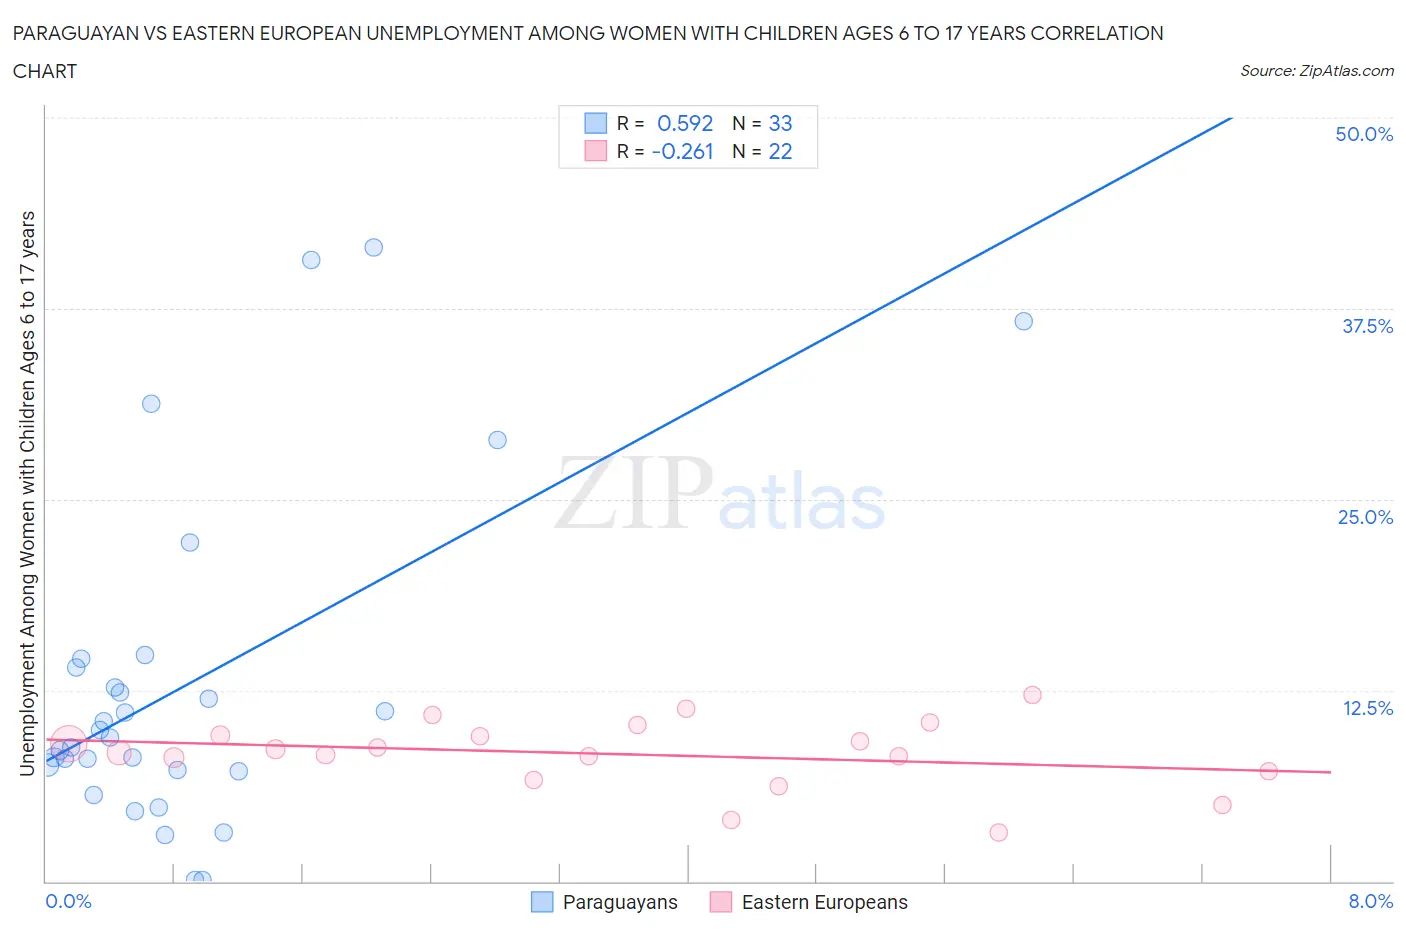 Paraguayan vs Eastern European Unemployment Among Women with Children Ages 6 to 17 years